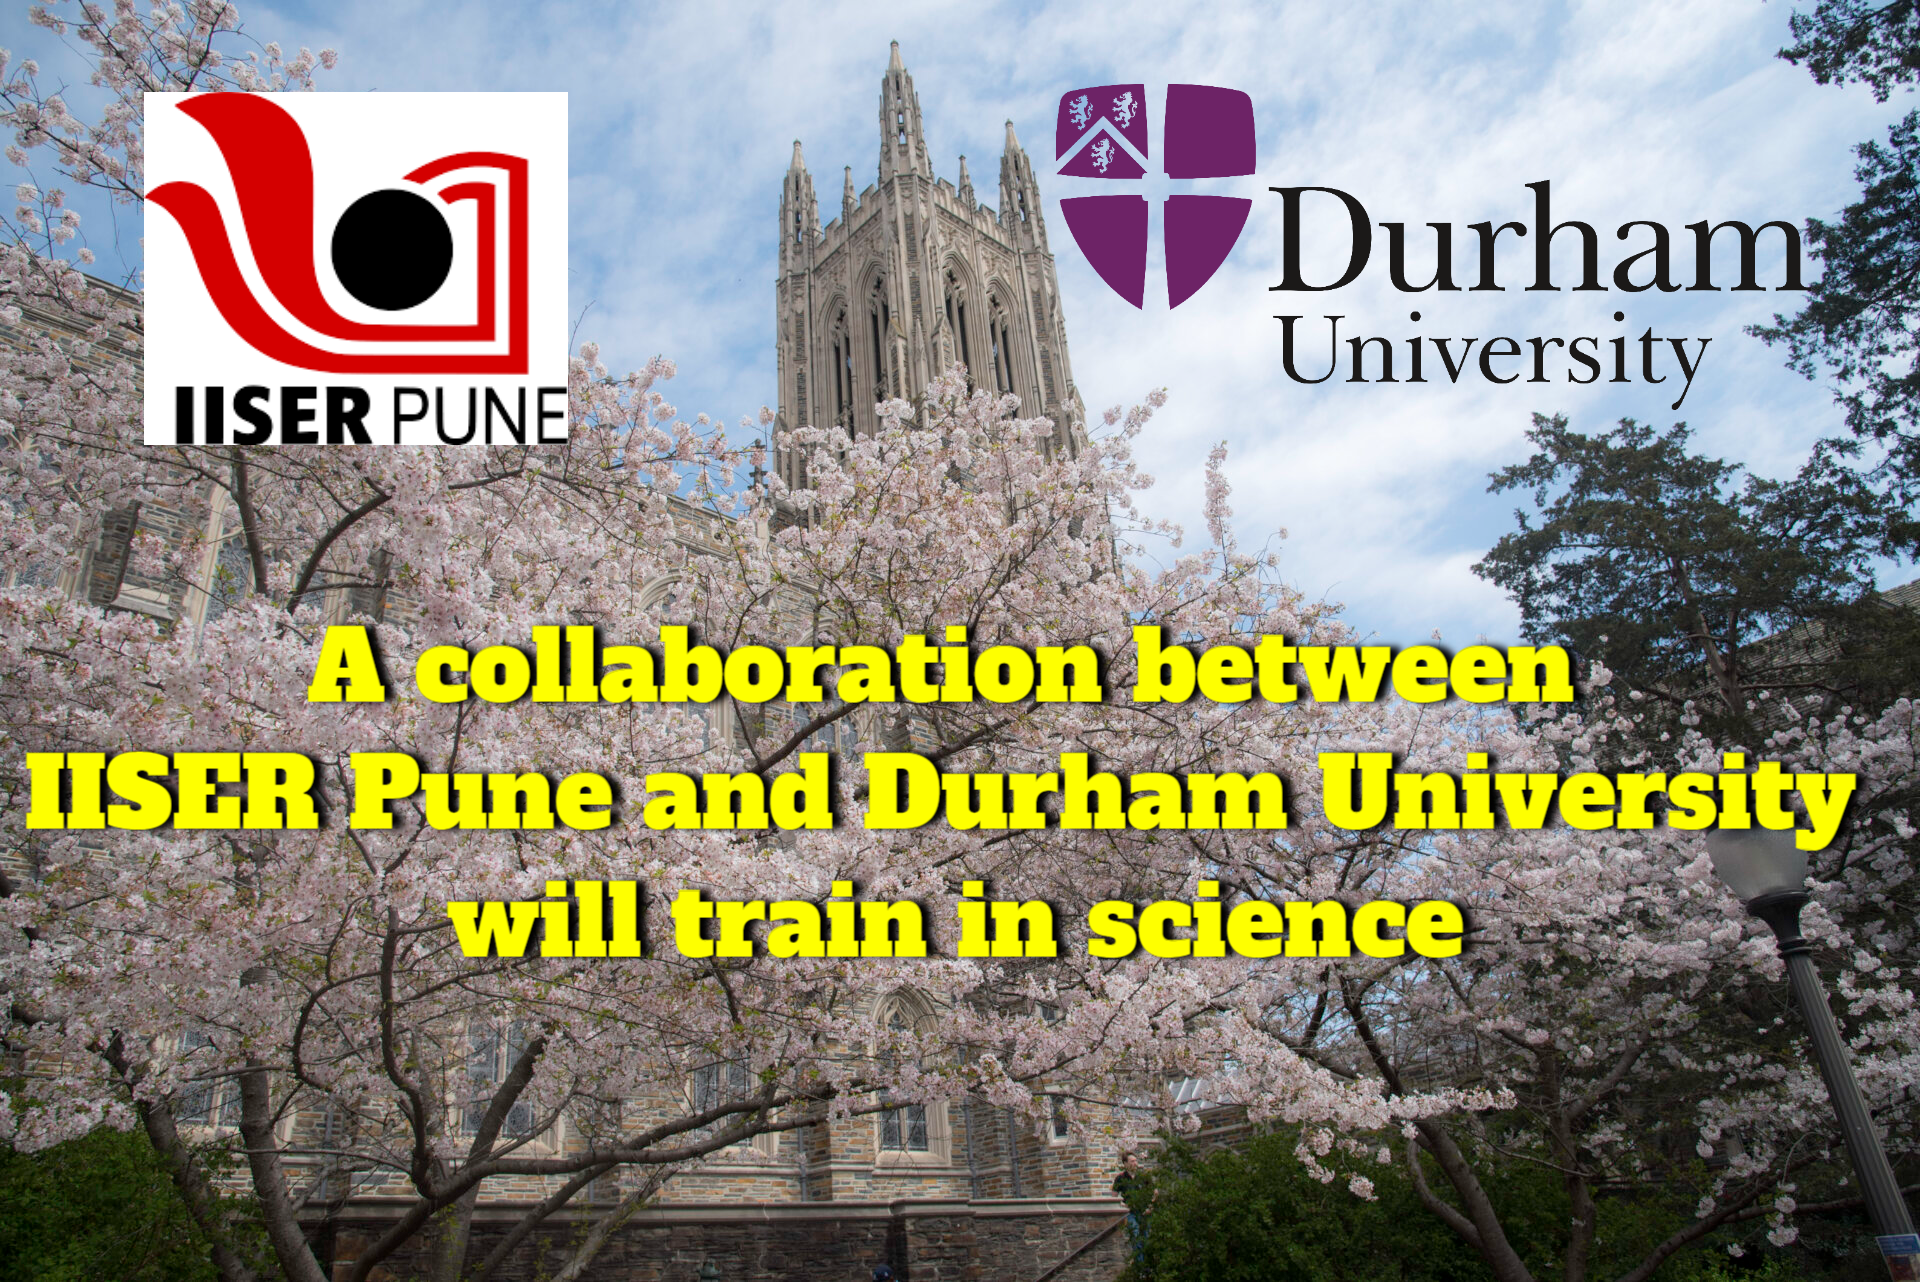 In partnership with Durham University, IISER Pune will prepare college professors to teach science